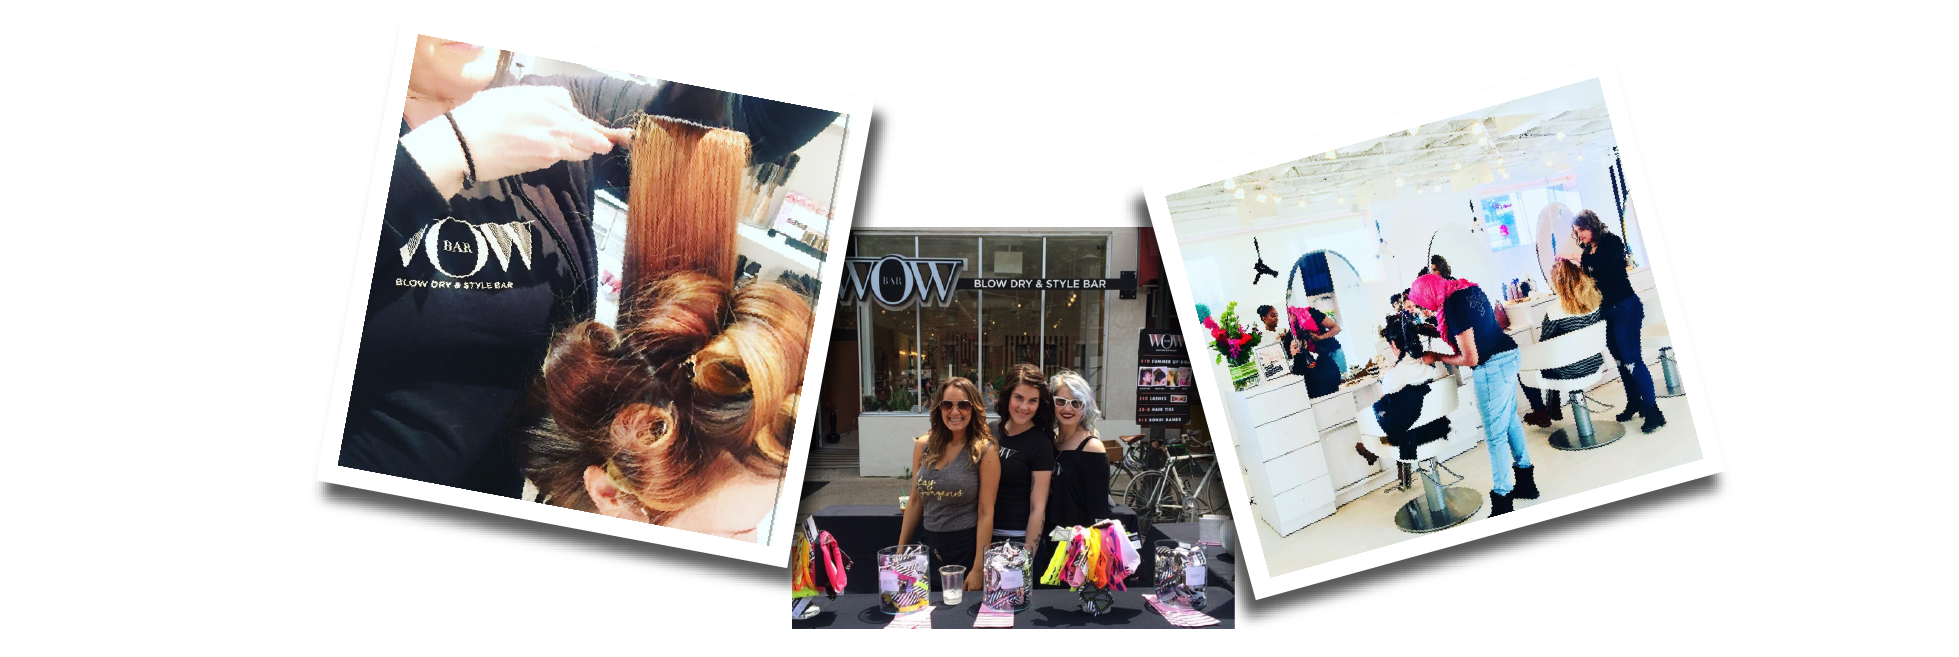 The Wow Bar - Blow Dry & Style Bar - The Best Blowout in the Twin Cities